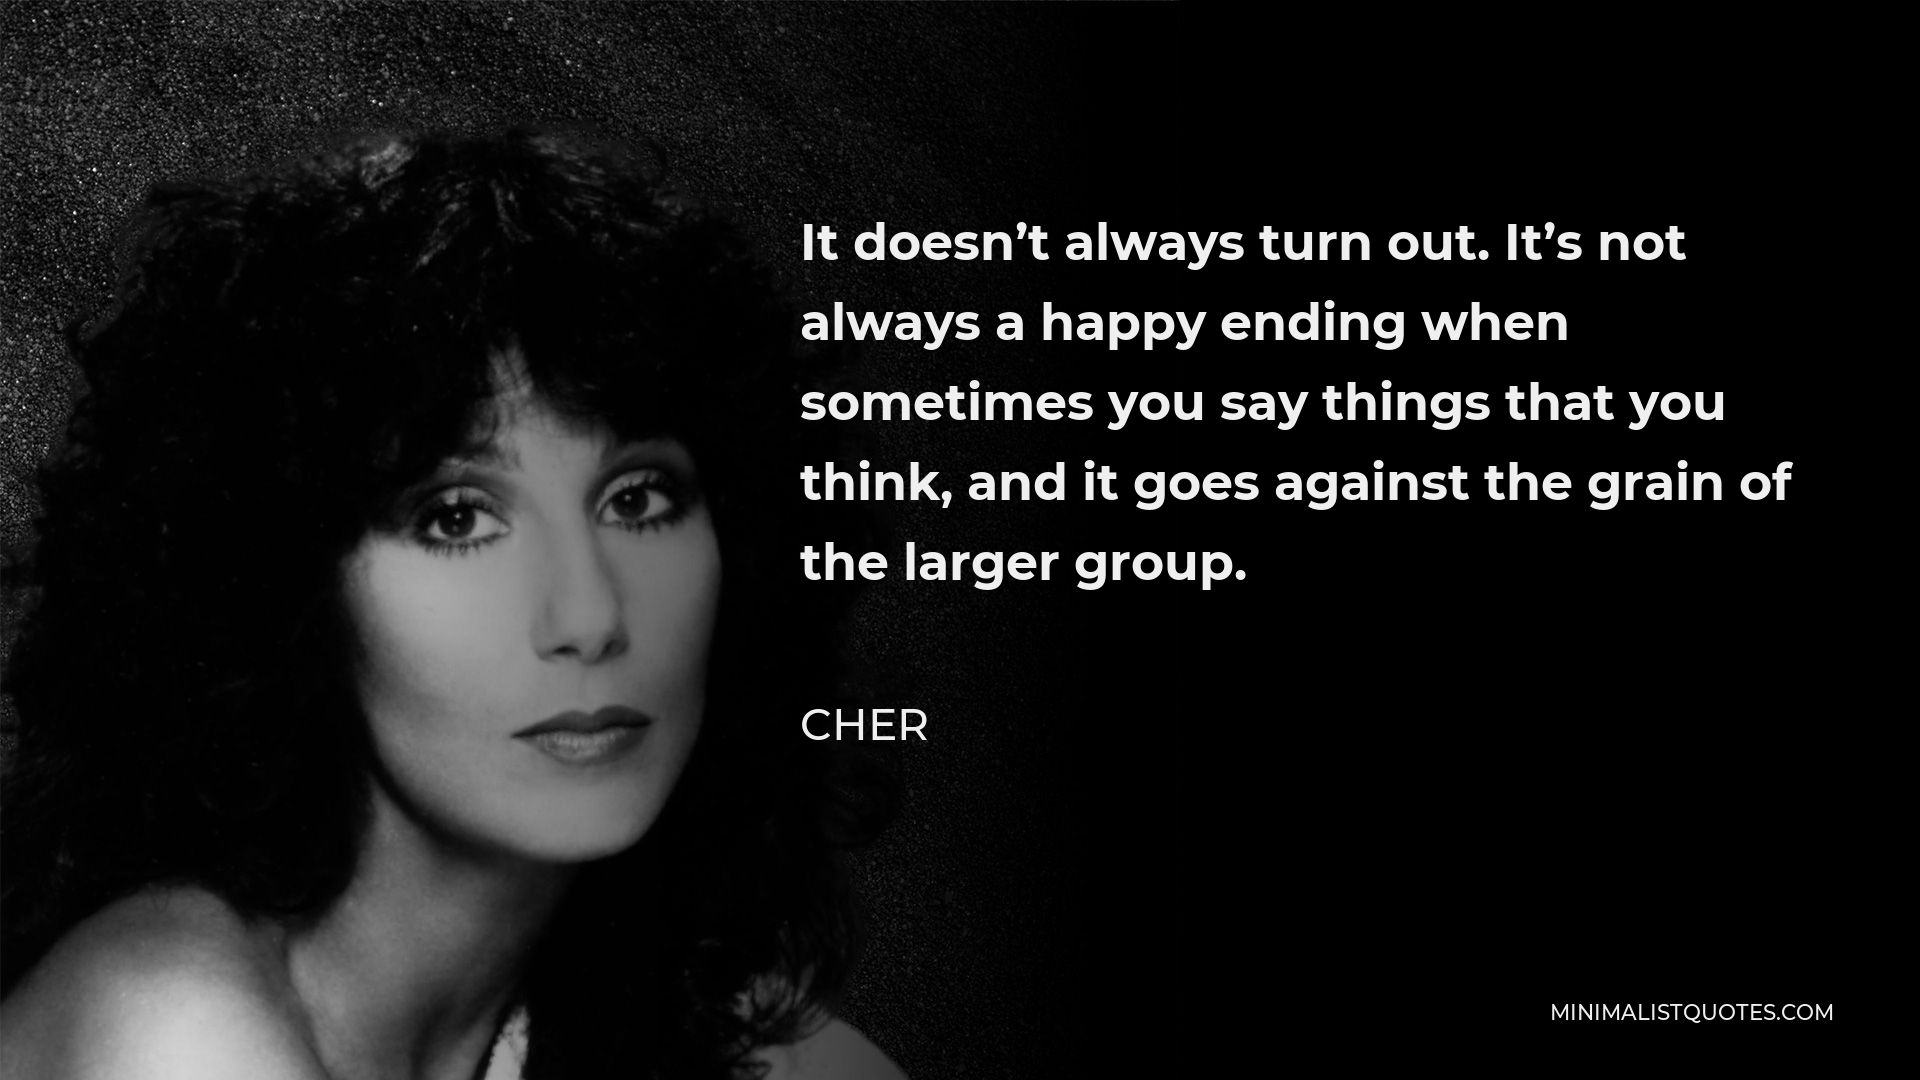 Cher Quote - It doesn’t always turn out. It’s not always a happy ending when sometimes you say things that you think, and it goes against the grain of the larger group.